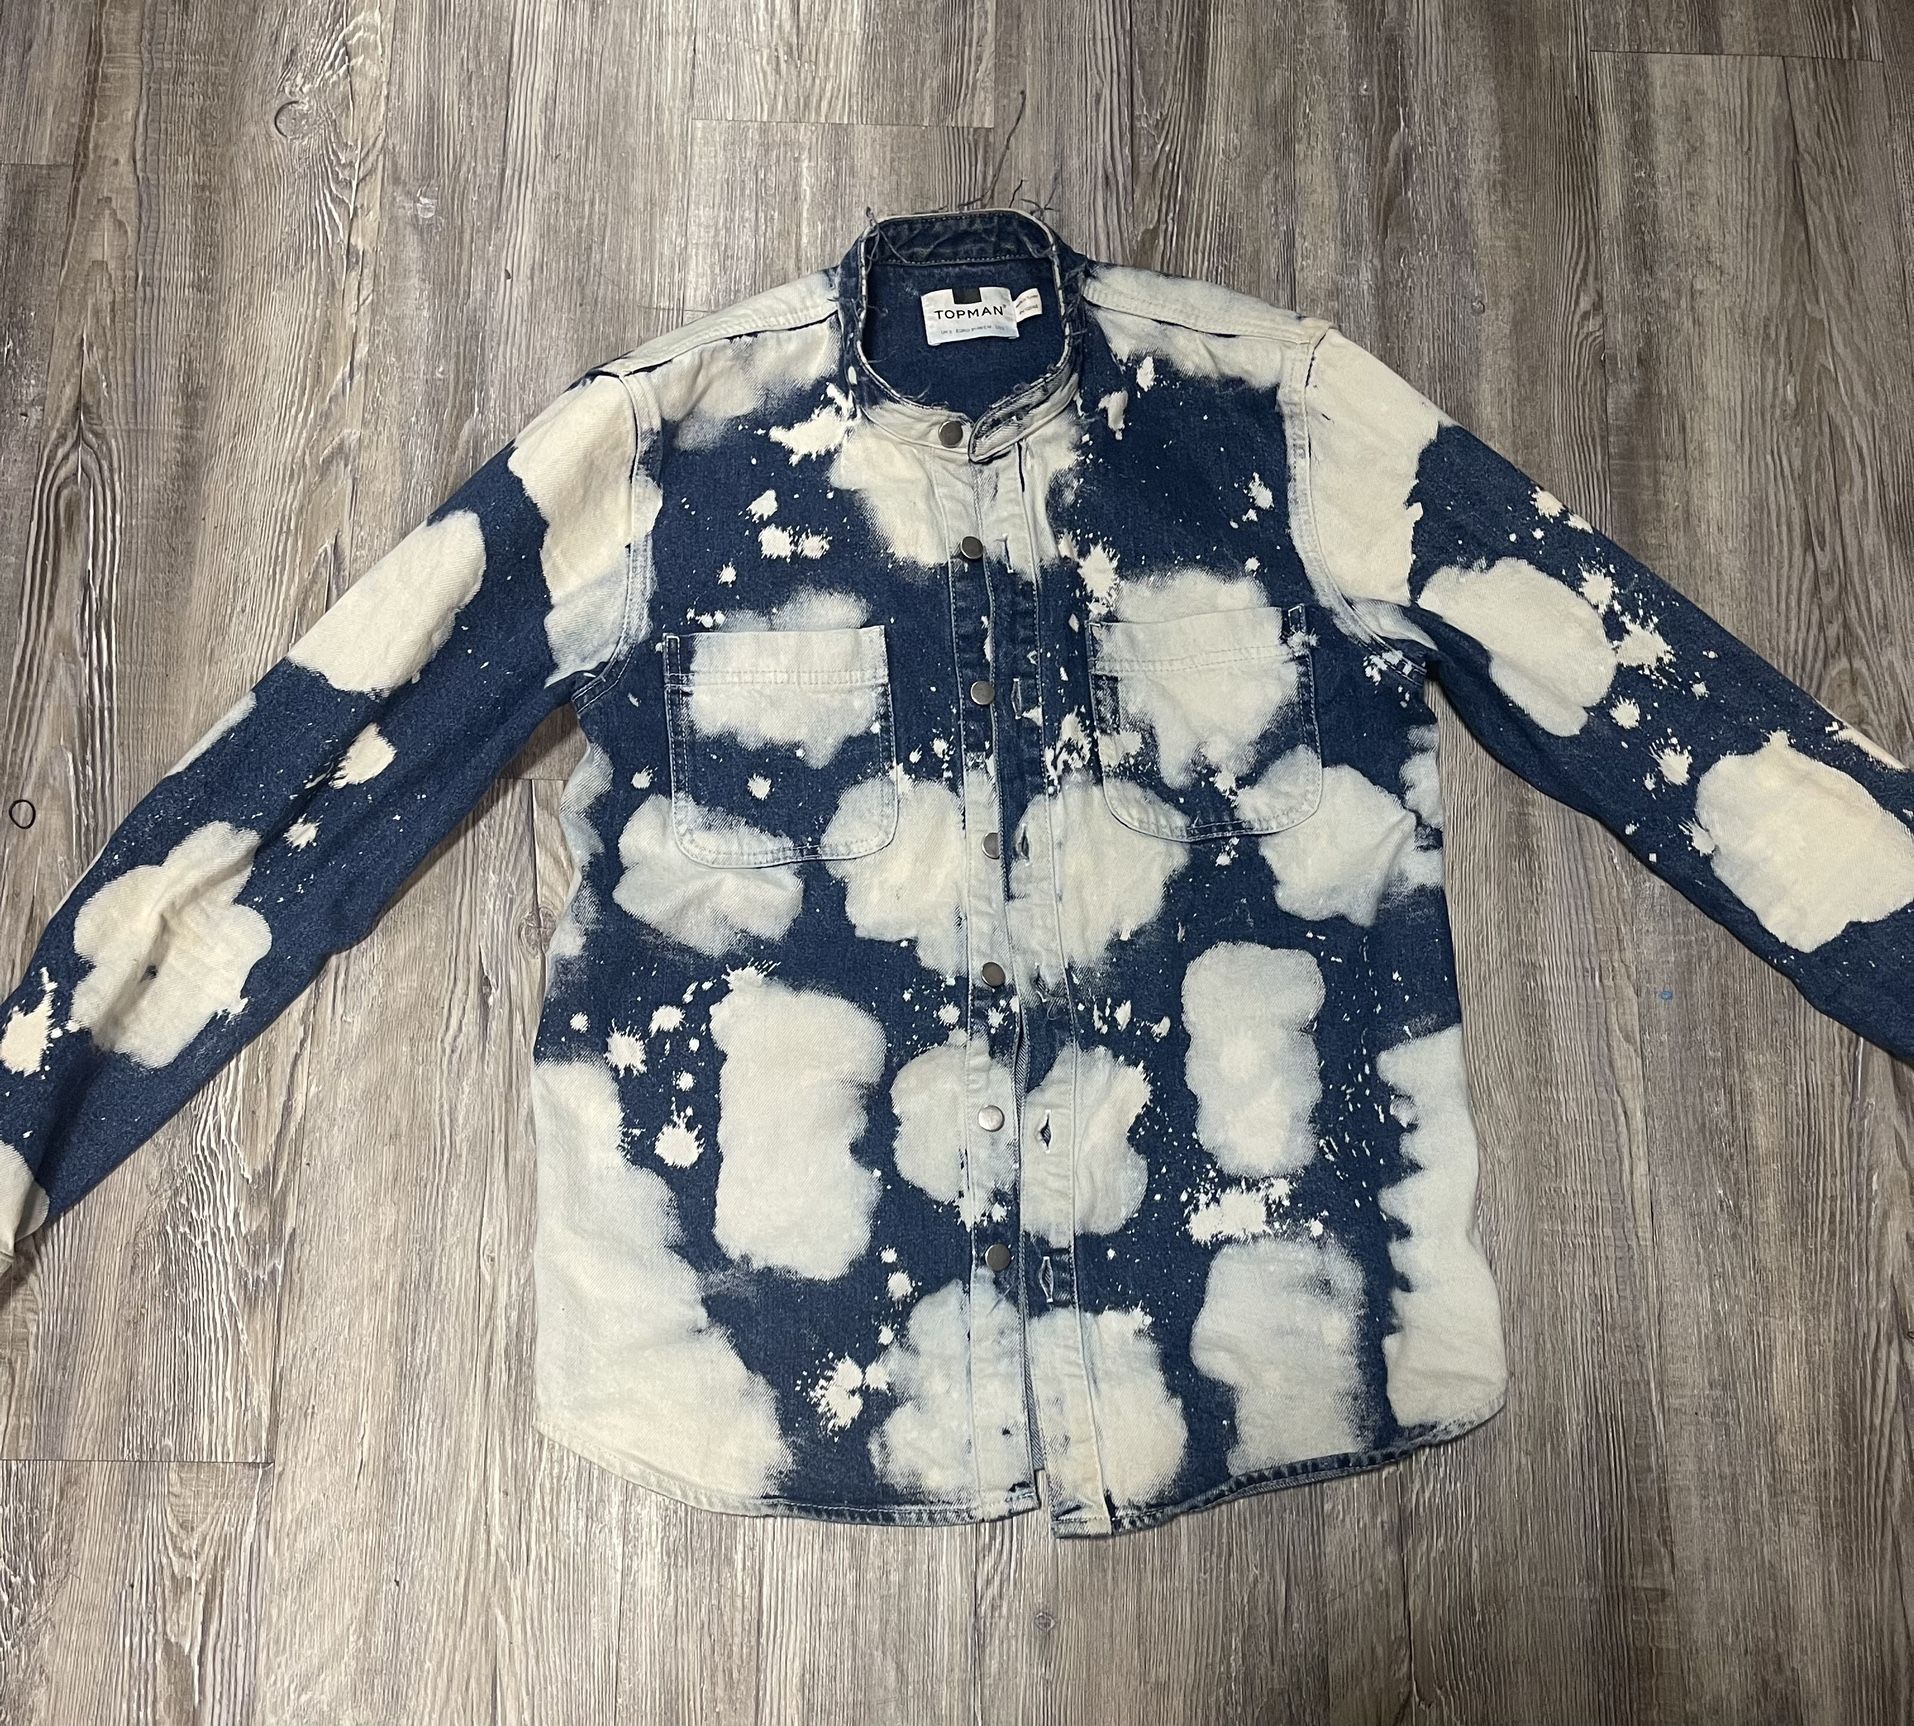 Jean Jacket Shirt For Sale $20 Size Small 